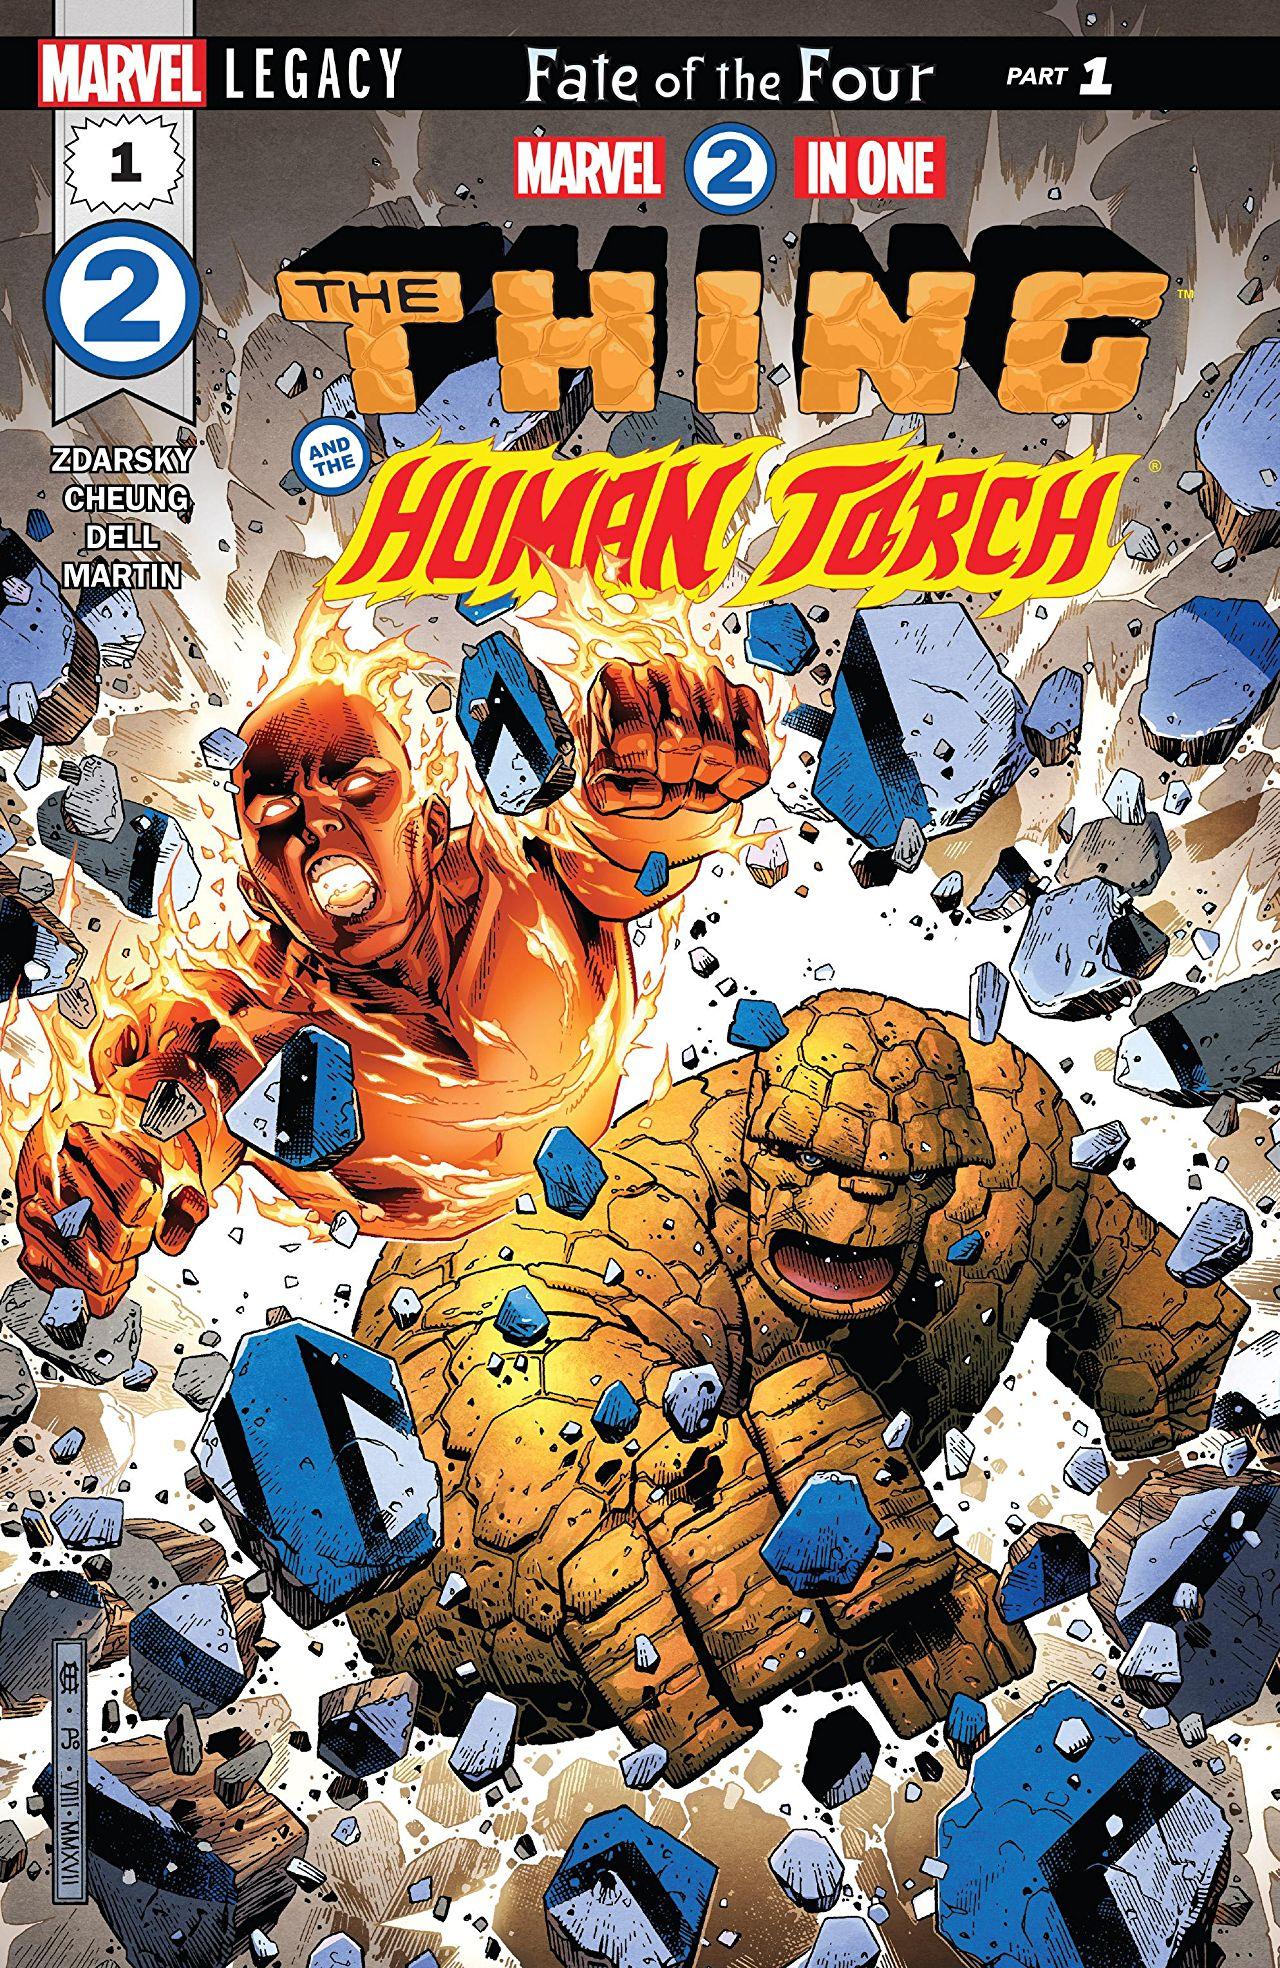 Marvel Two-In-One Vol. 2 #1